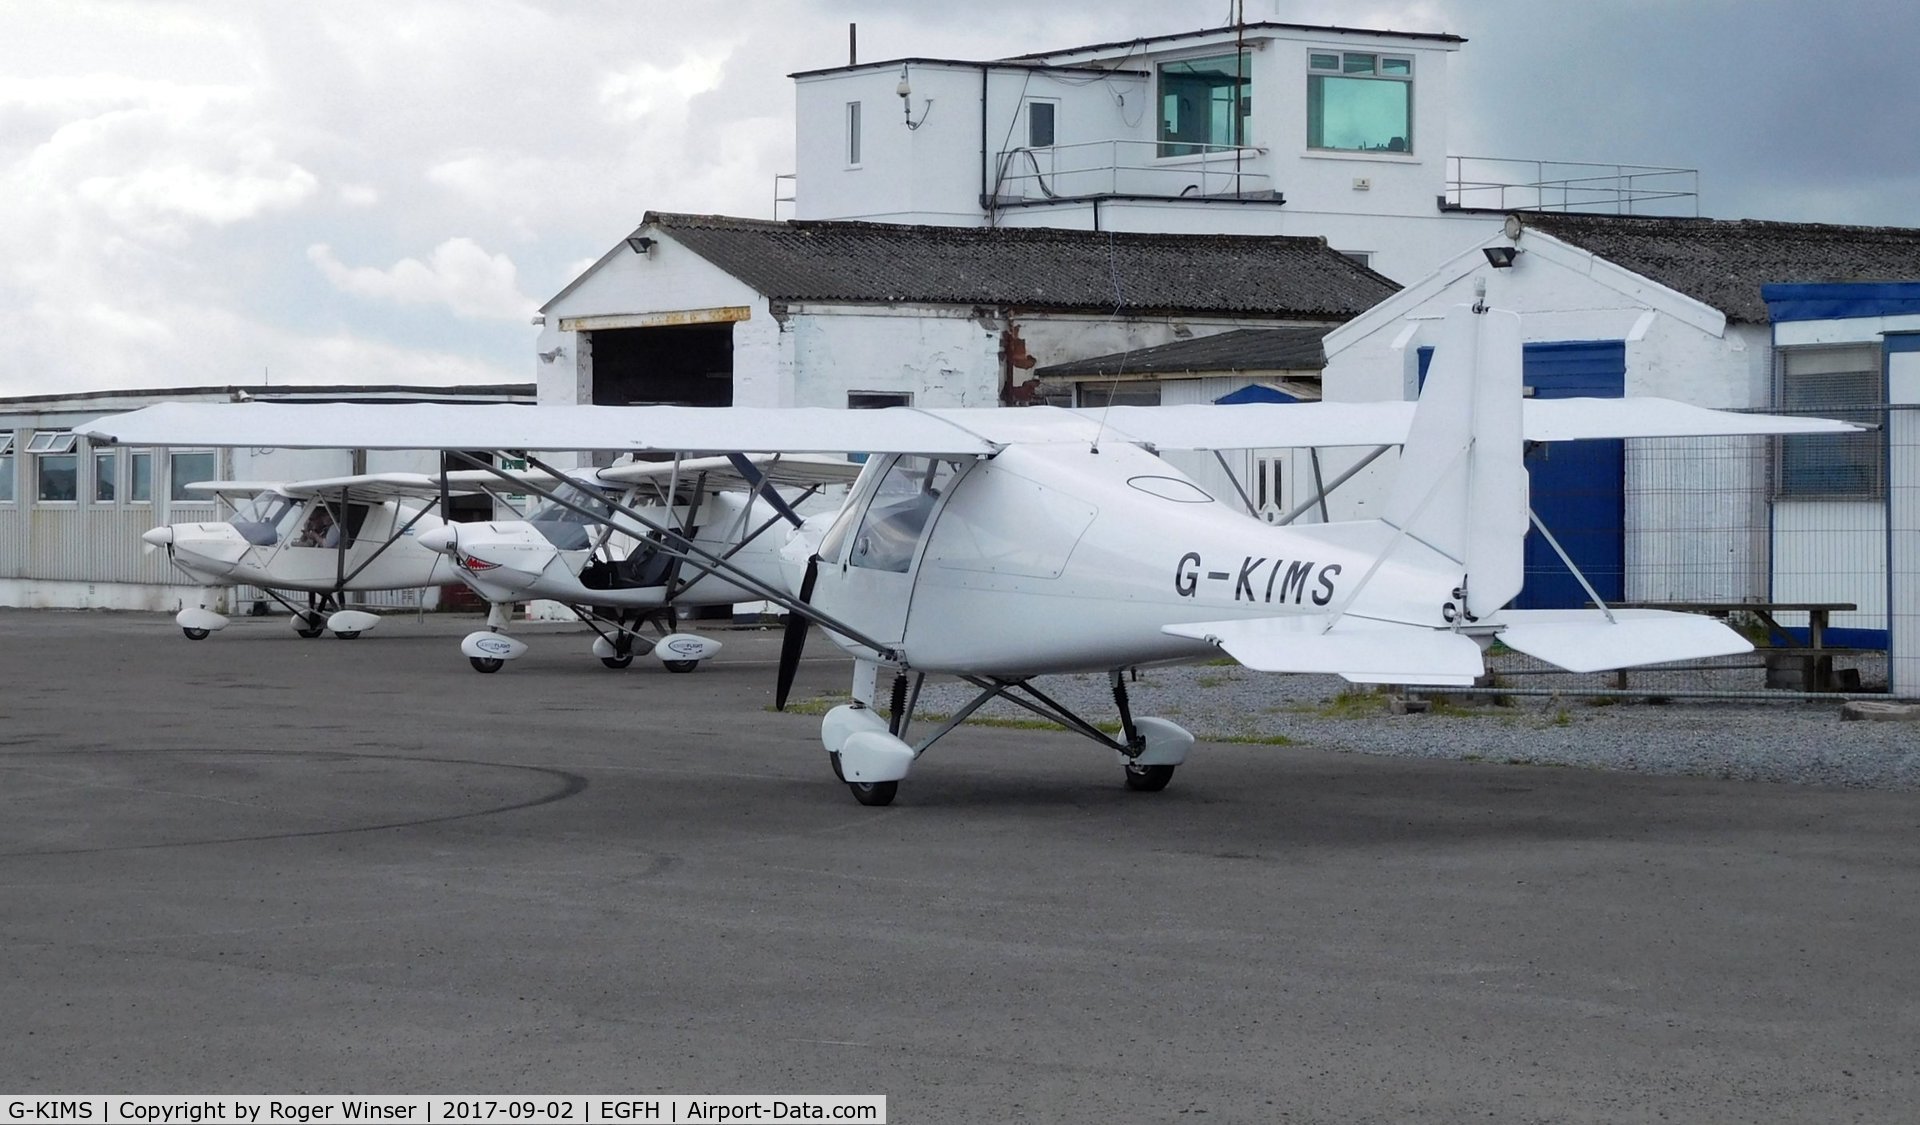 G-KIMS, 2017 Comco Ikarus C42 FB100 C/N 1704-7497, Resident C42, the latest addition to the Gower Flight Centre fleet seen with the other aircraft in the fleet (G-ZASH and G-ORMW).